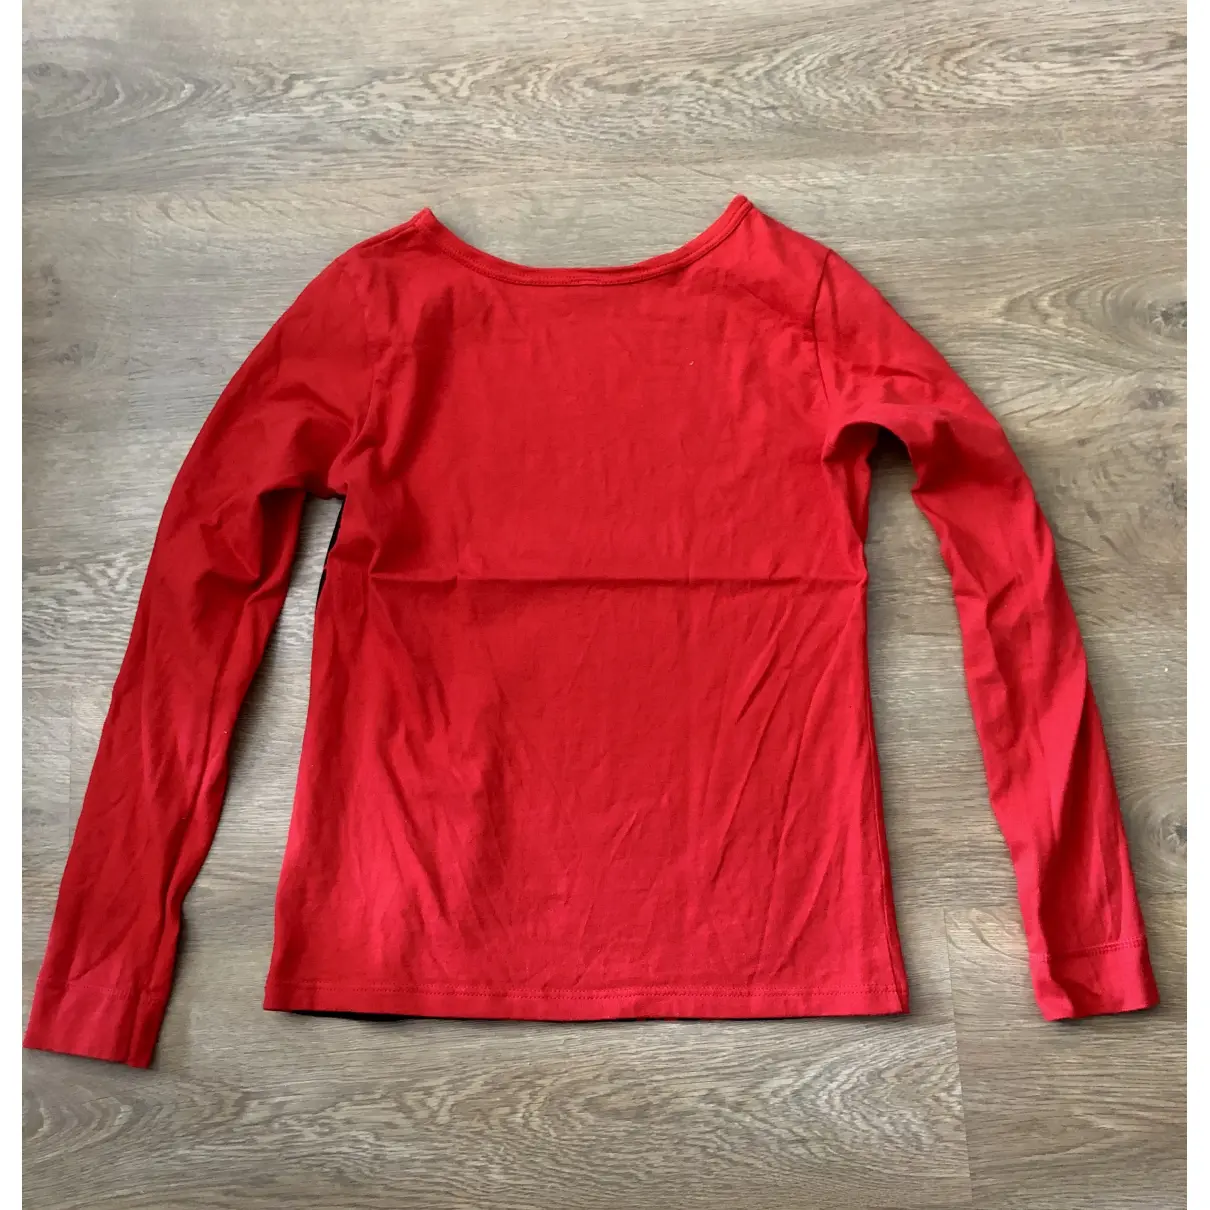 Buy Hysteric Glamour Red Cotton Top online